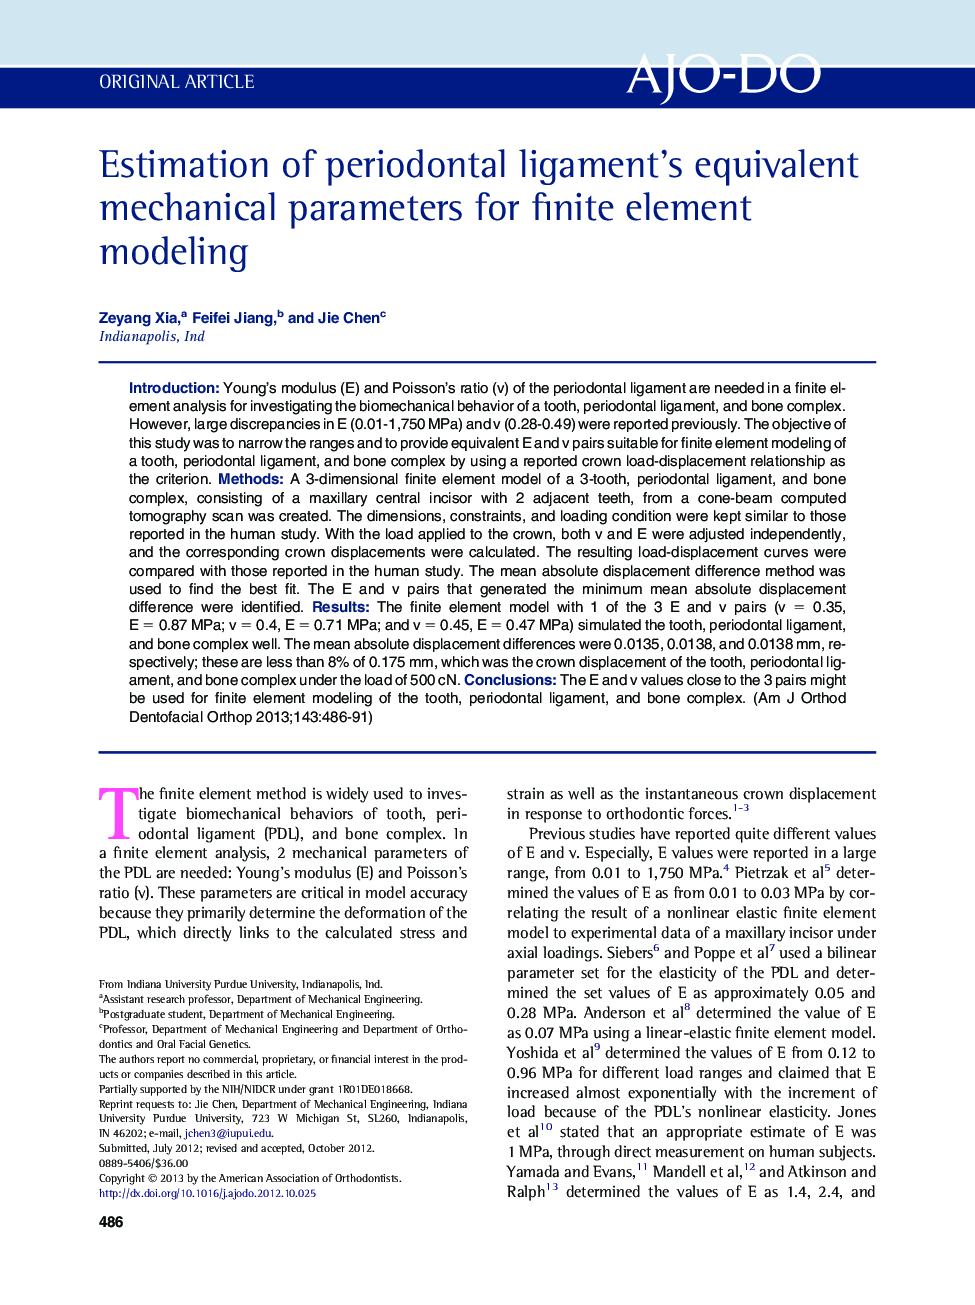 Estimation of periodontal ligament's equivalent mechanical parameters for finite element modeling 